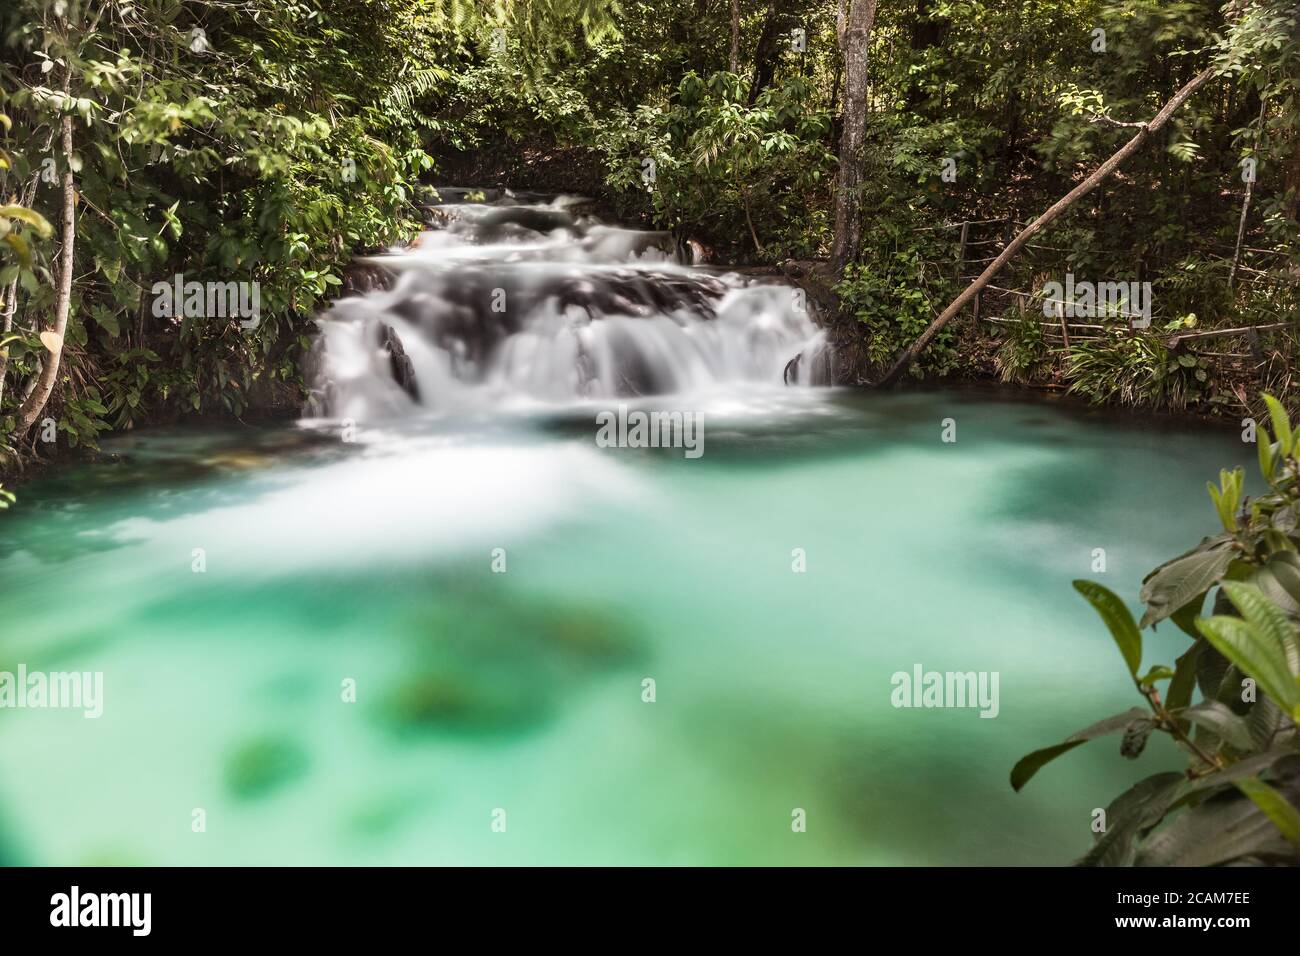 Waterfall and lake of Formiga (ant) River - Jalapao, Tocantins, Brazil Stock Photo